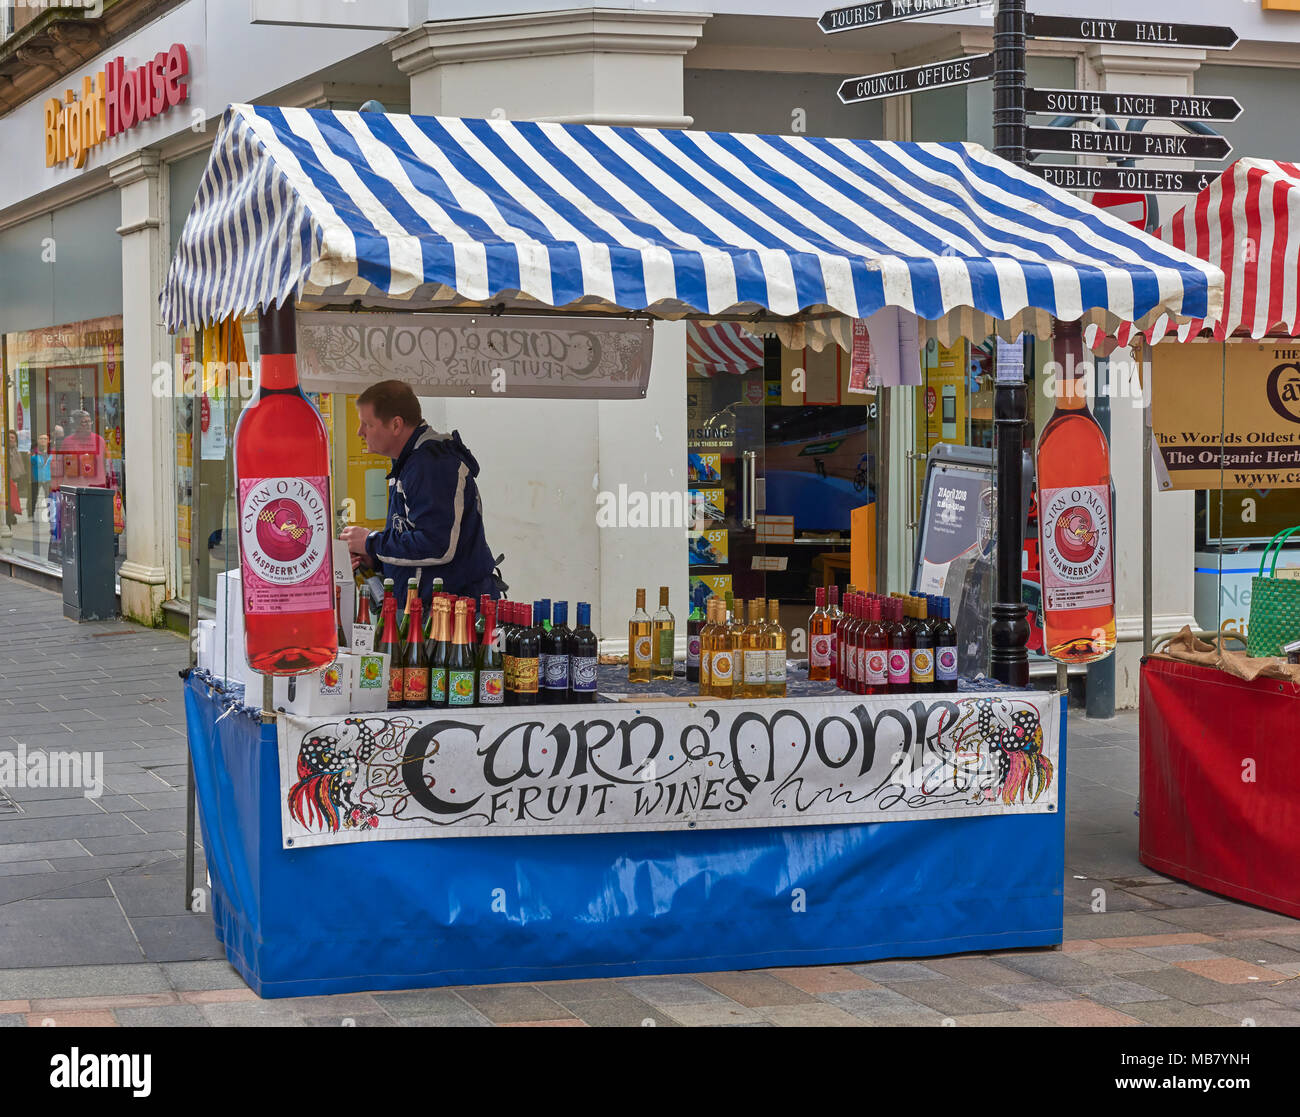 The Cairn O'Mohr Cider Company Stall at the Open Air Farmers Market in the High Street of Perth, Scotland Stock Photo